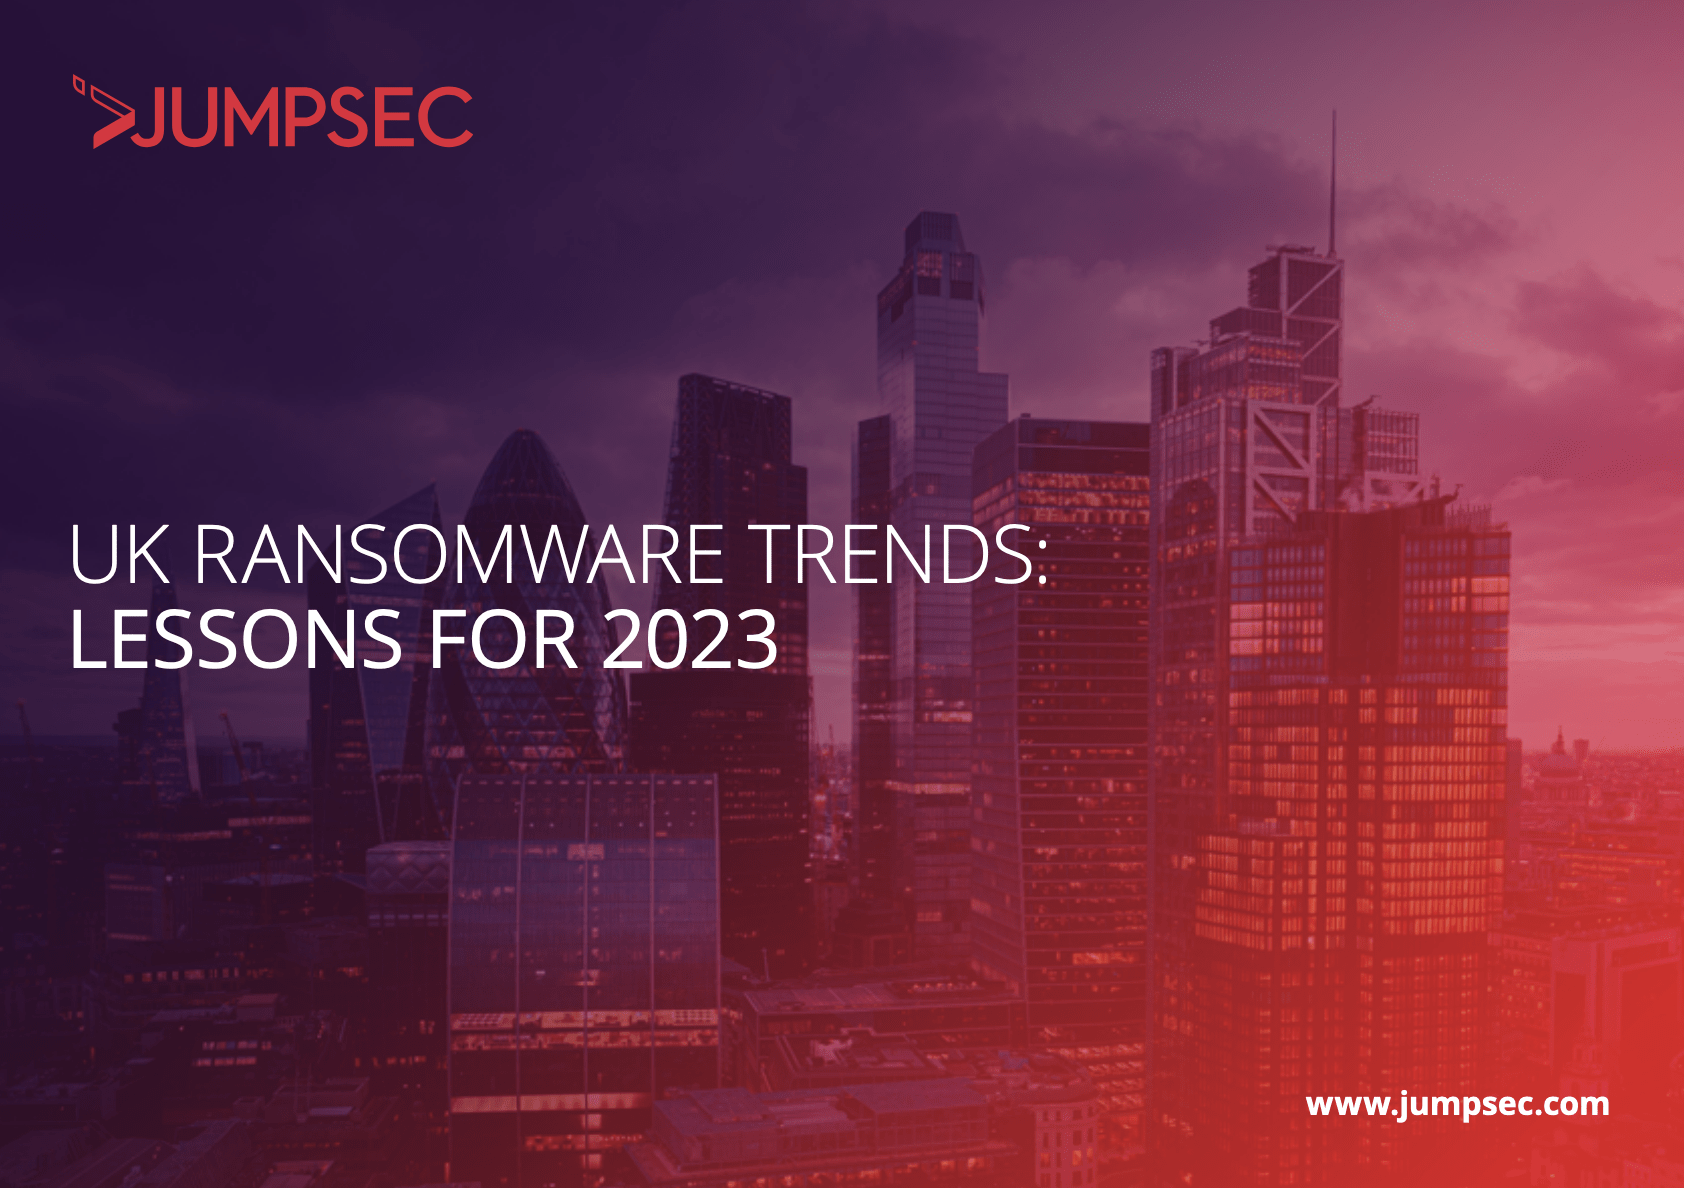 UK Ransomware trends